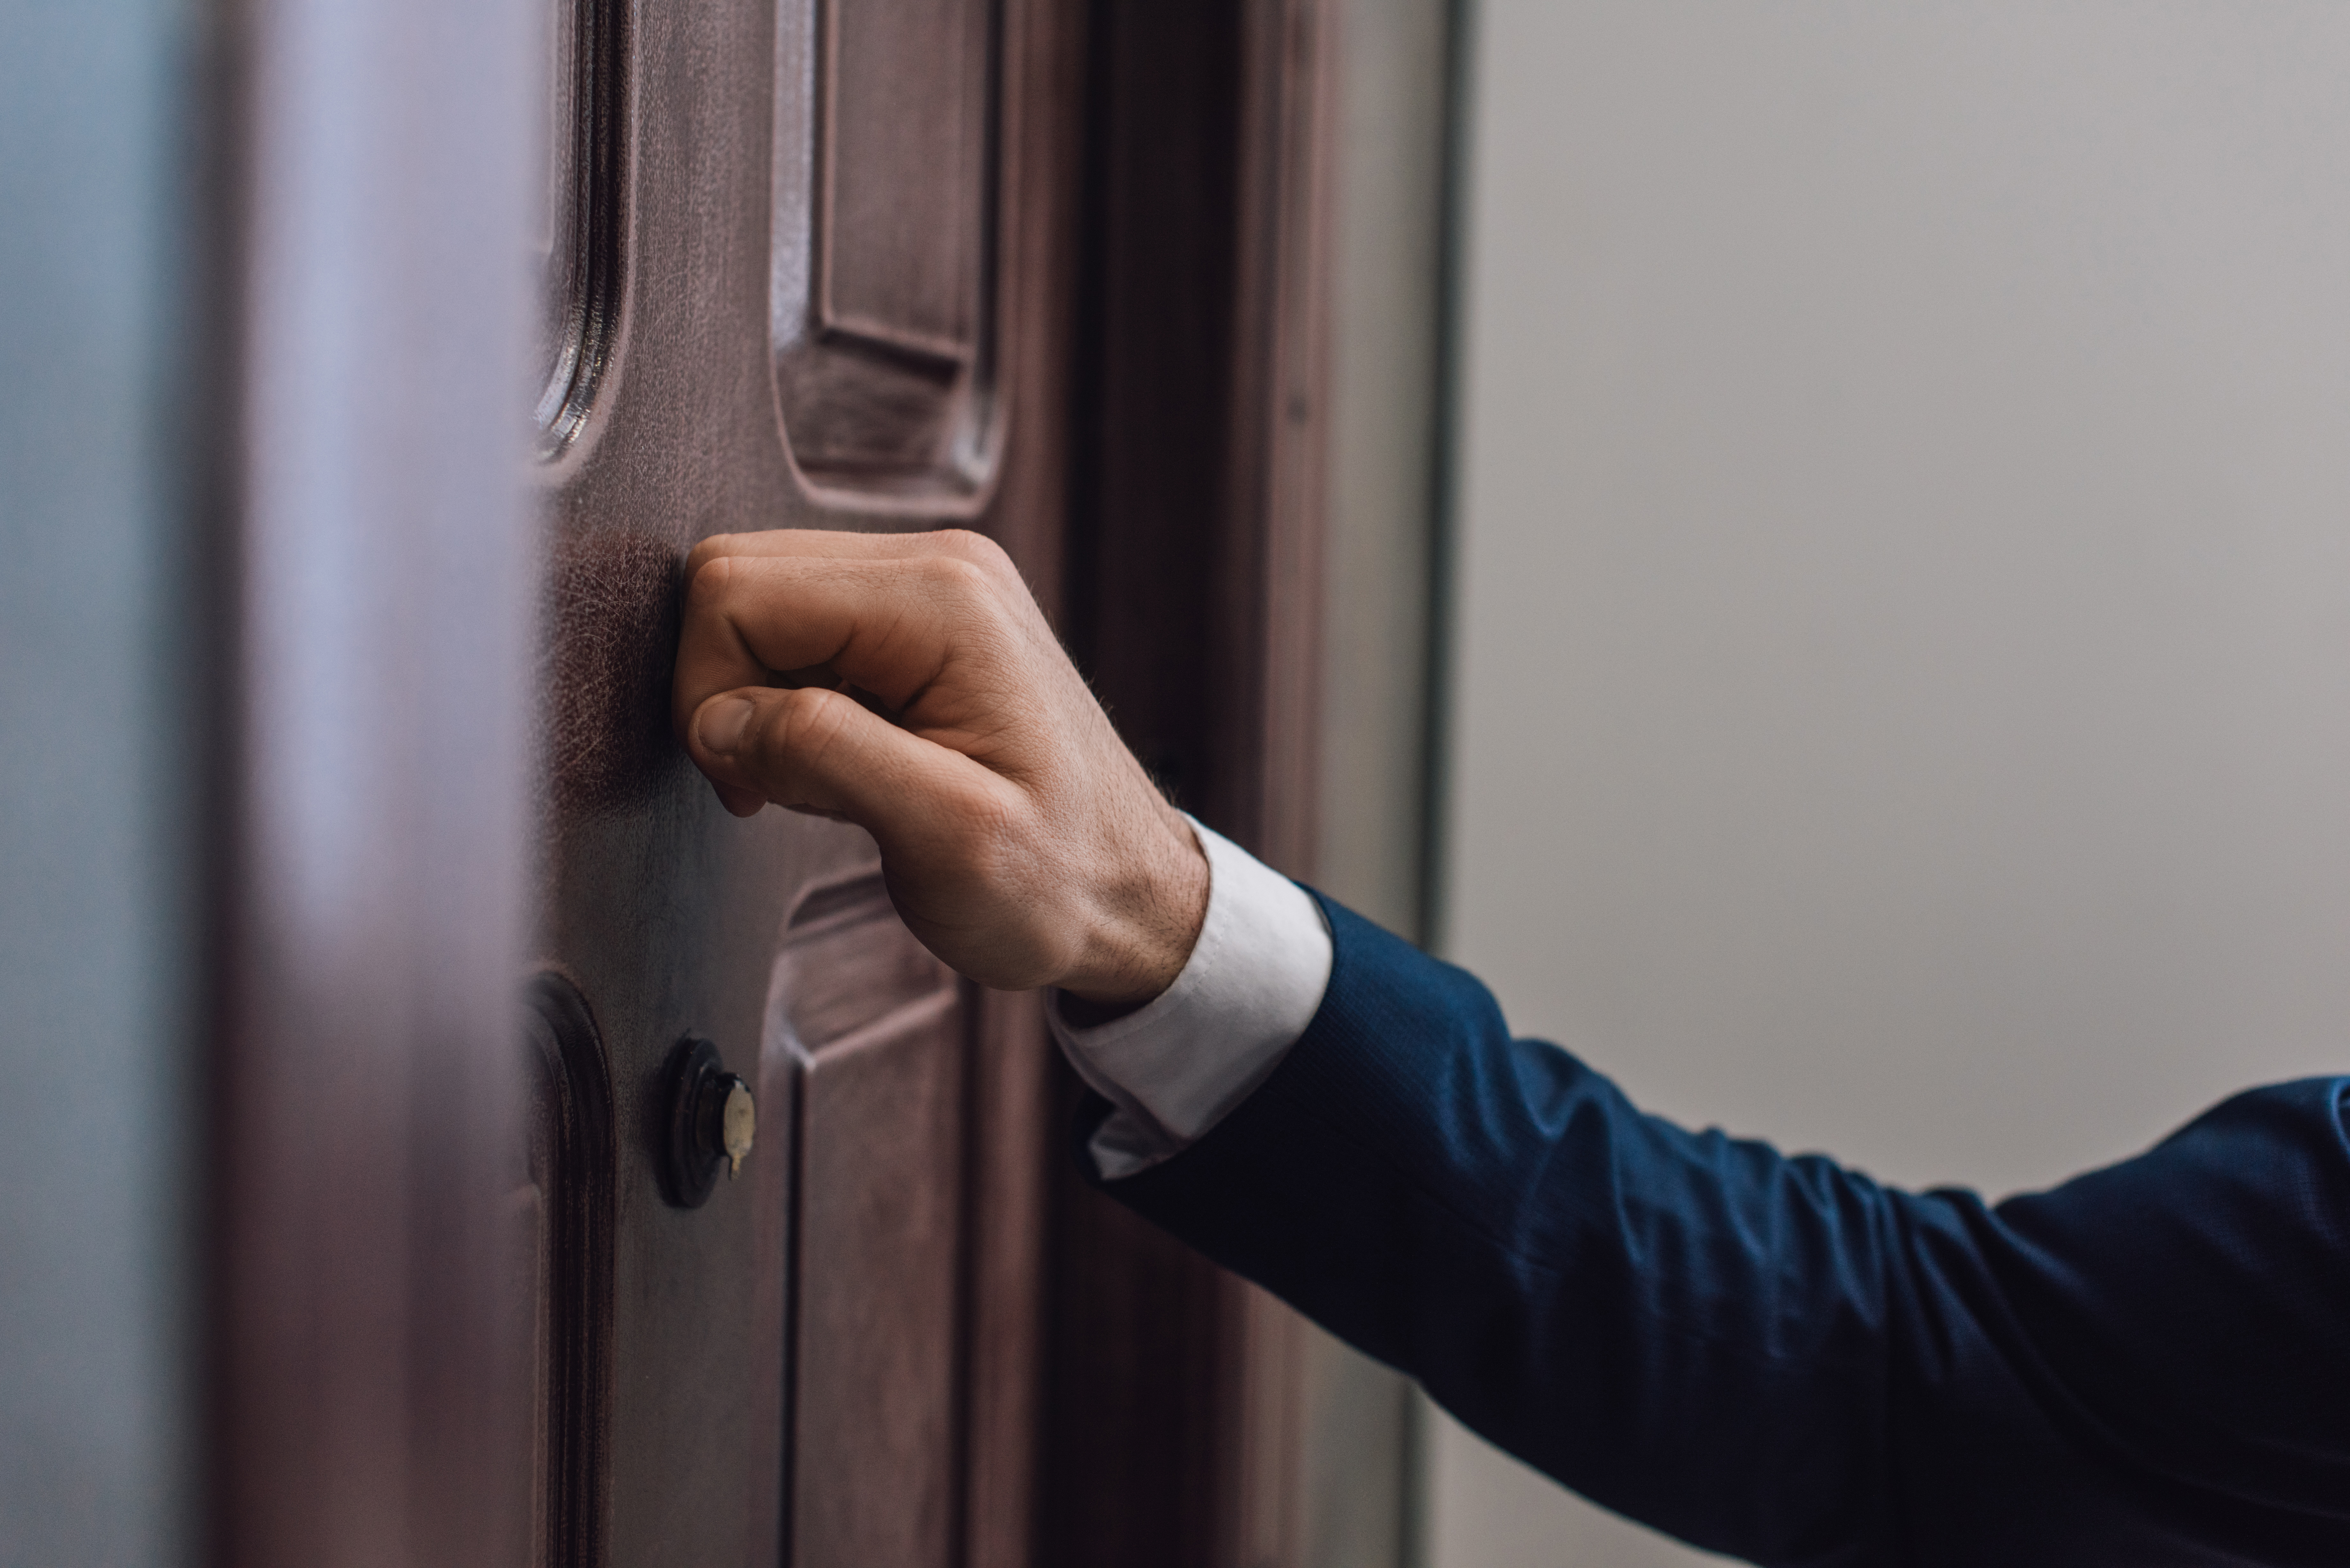 Cropped view of someone knocking on door with hand. | Source: Shutterstock